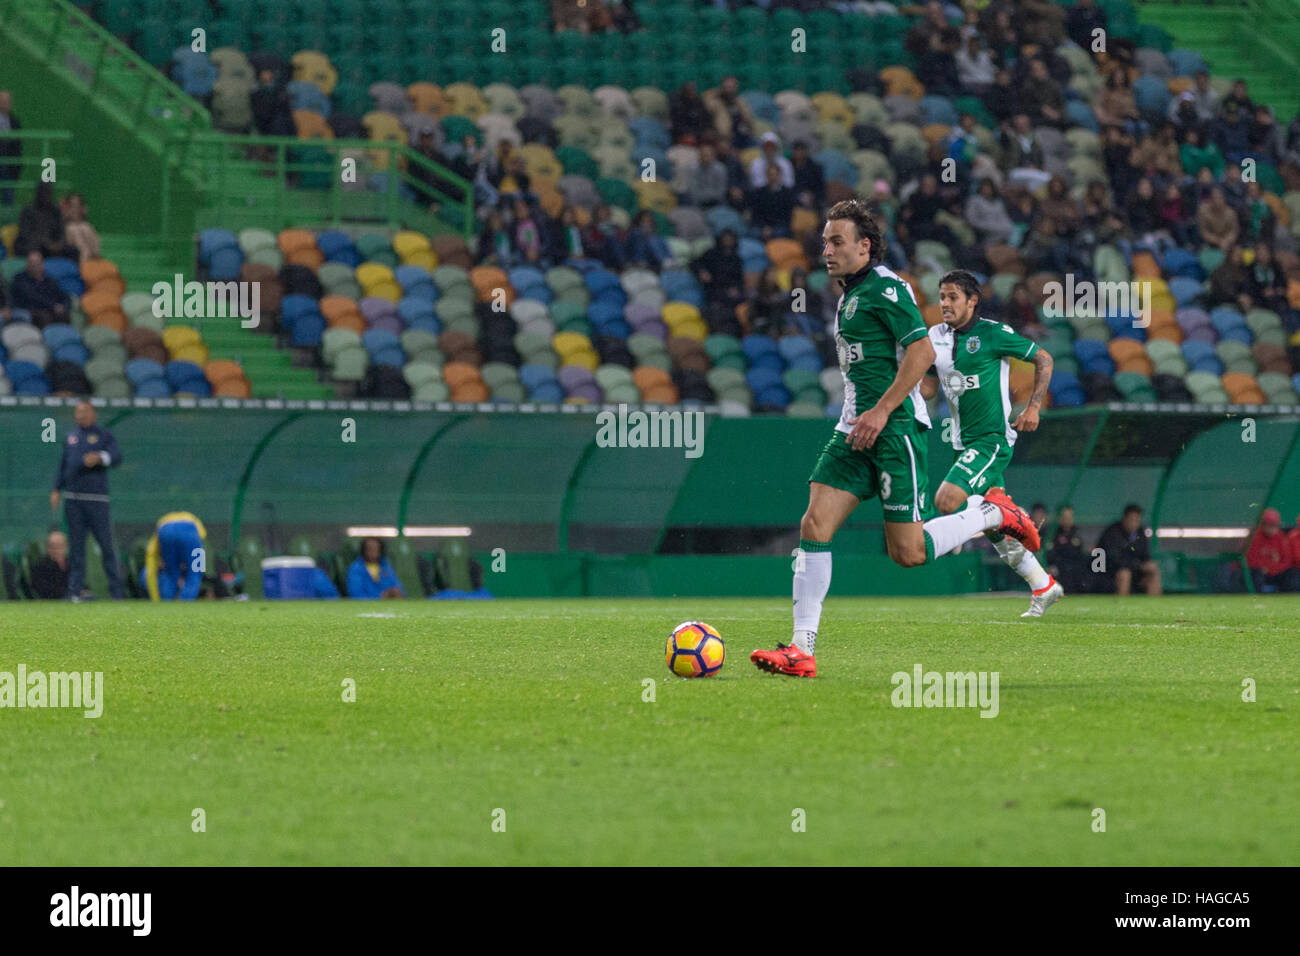 Lisbon, Portugal. 30th Nov, 2016.  Sporting's forward from Serbia Lazar Markovic (3) in action during the game Sporting CP vs FC Arouca Credit:  Alexandre de Sousa/Alamy Live News Stock Photo